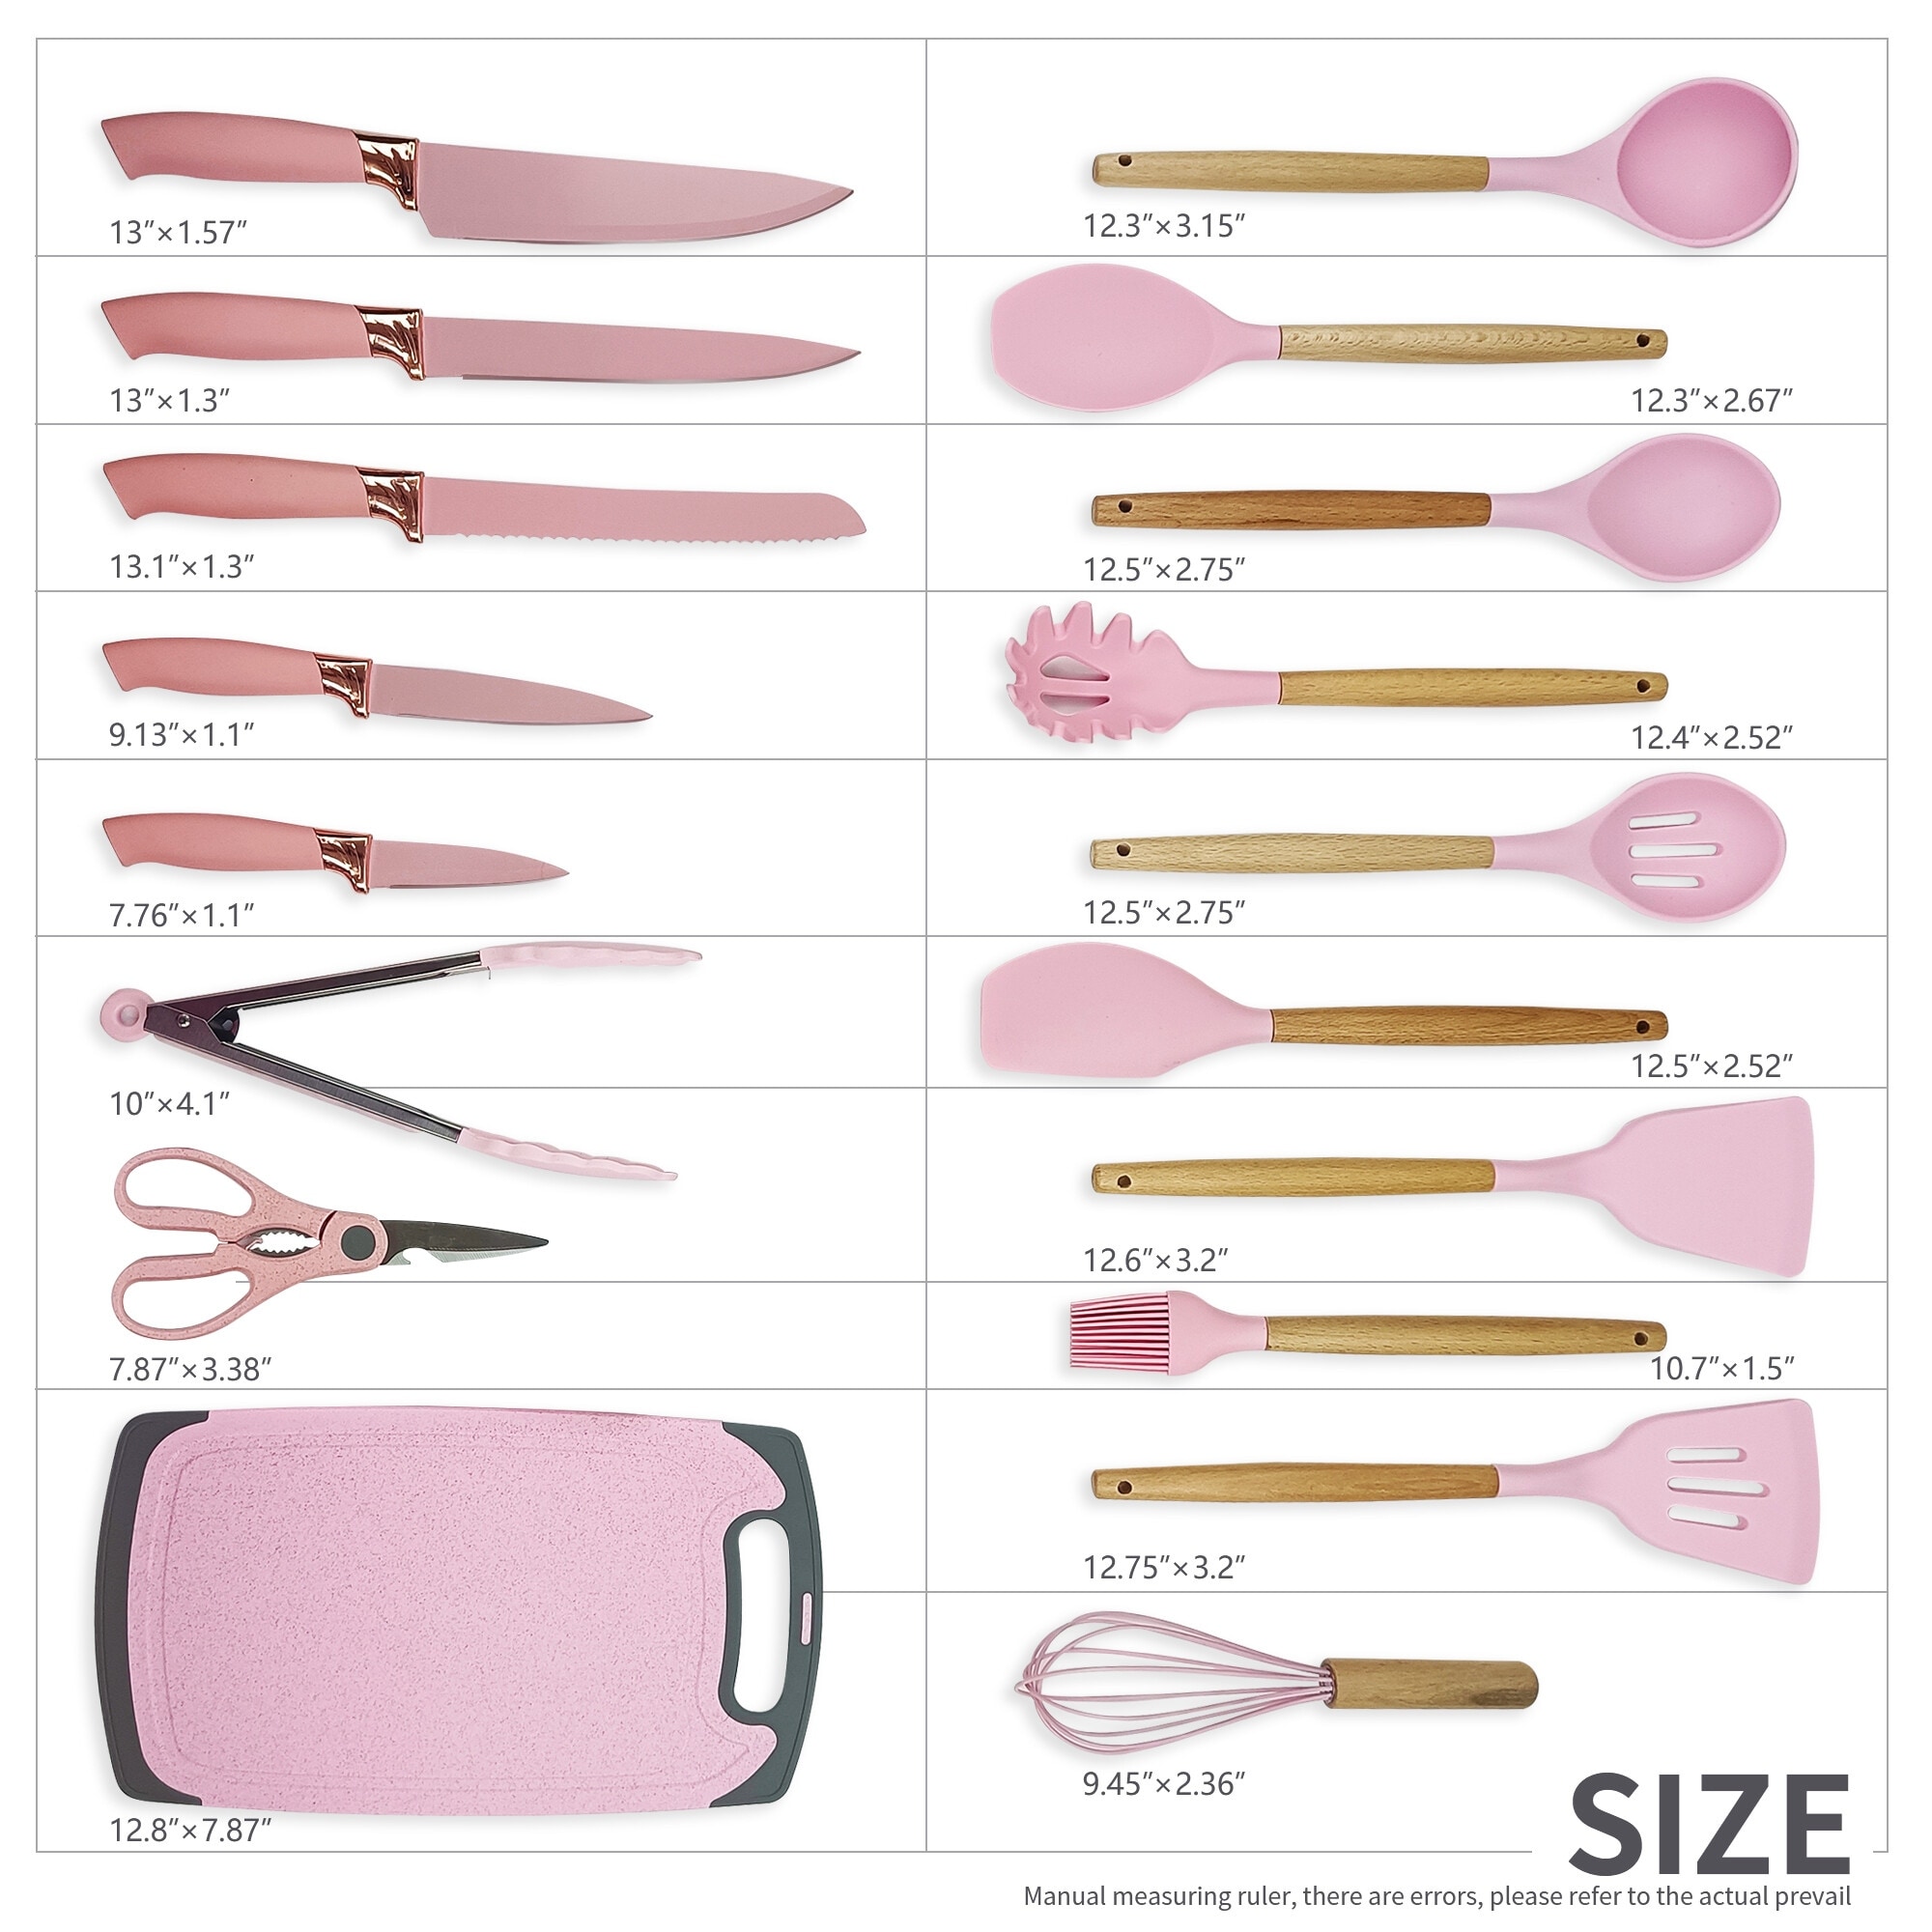 https://ak1.ostkcdn.com/images/products/is/images/direct/2abbd3afb39c1a8a97e8a3c2eef81c8e54fe7348/19-piece-Non-stick-Silicone-Assorted-Kitchen-Utensil-Set.jpg